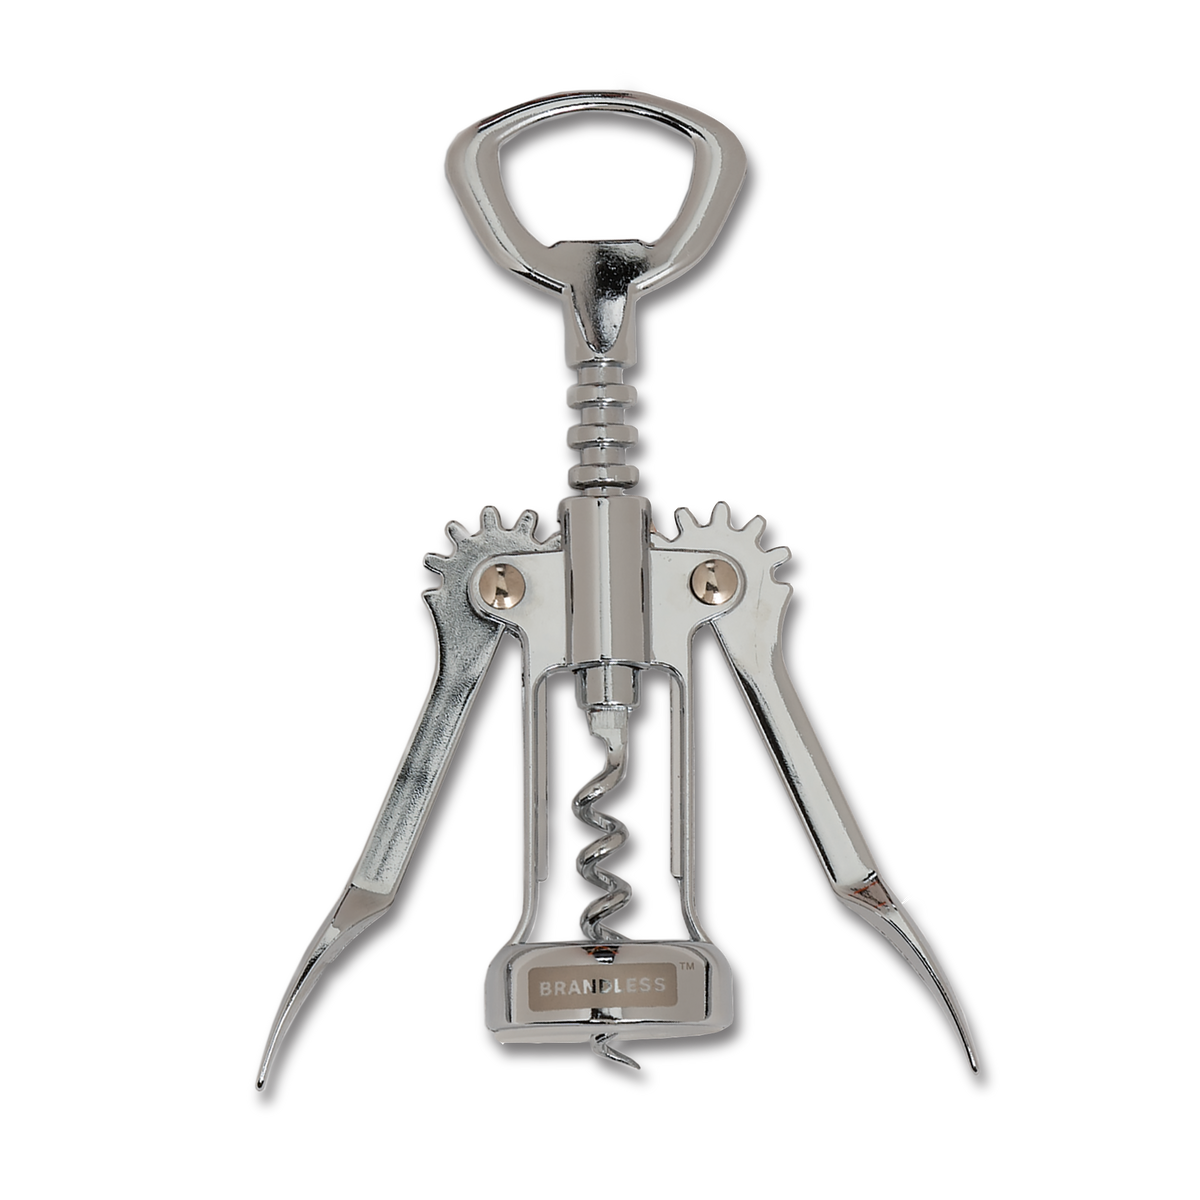 Front view, Brandless chrome-colored gear-arm corkscrew with bottle opener.